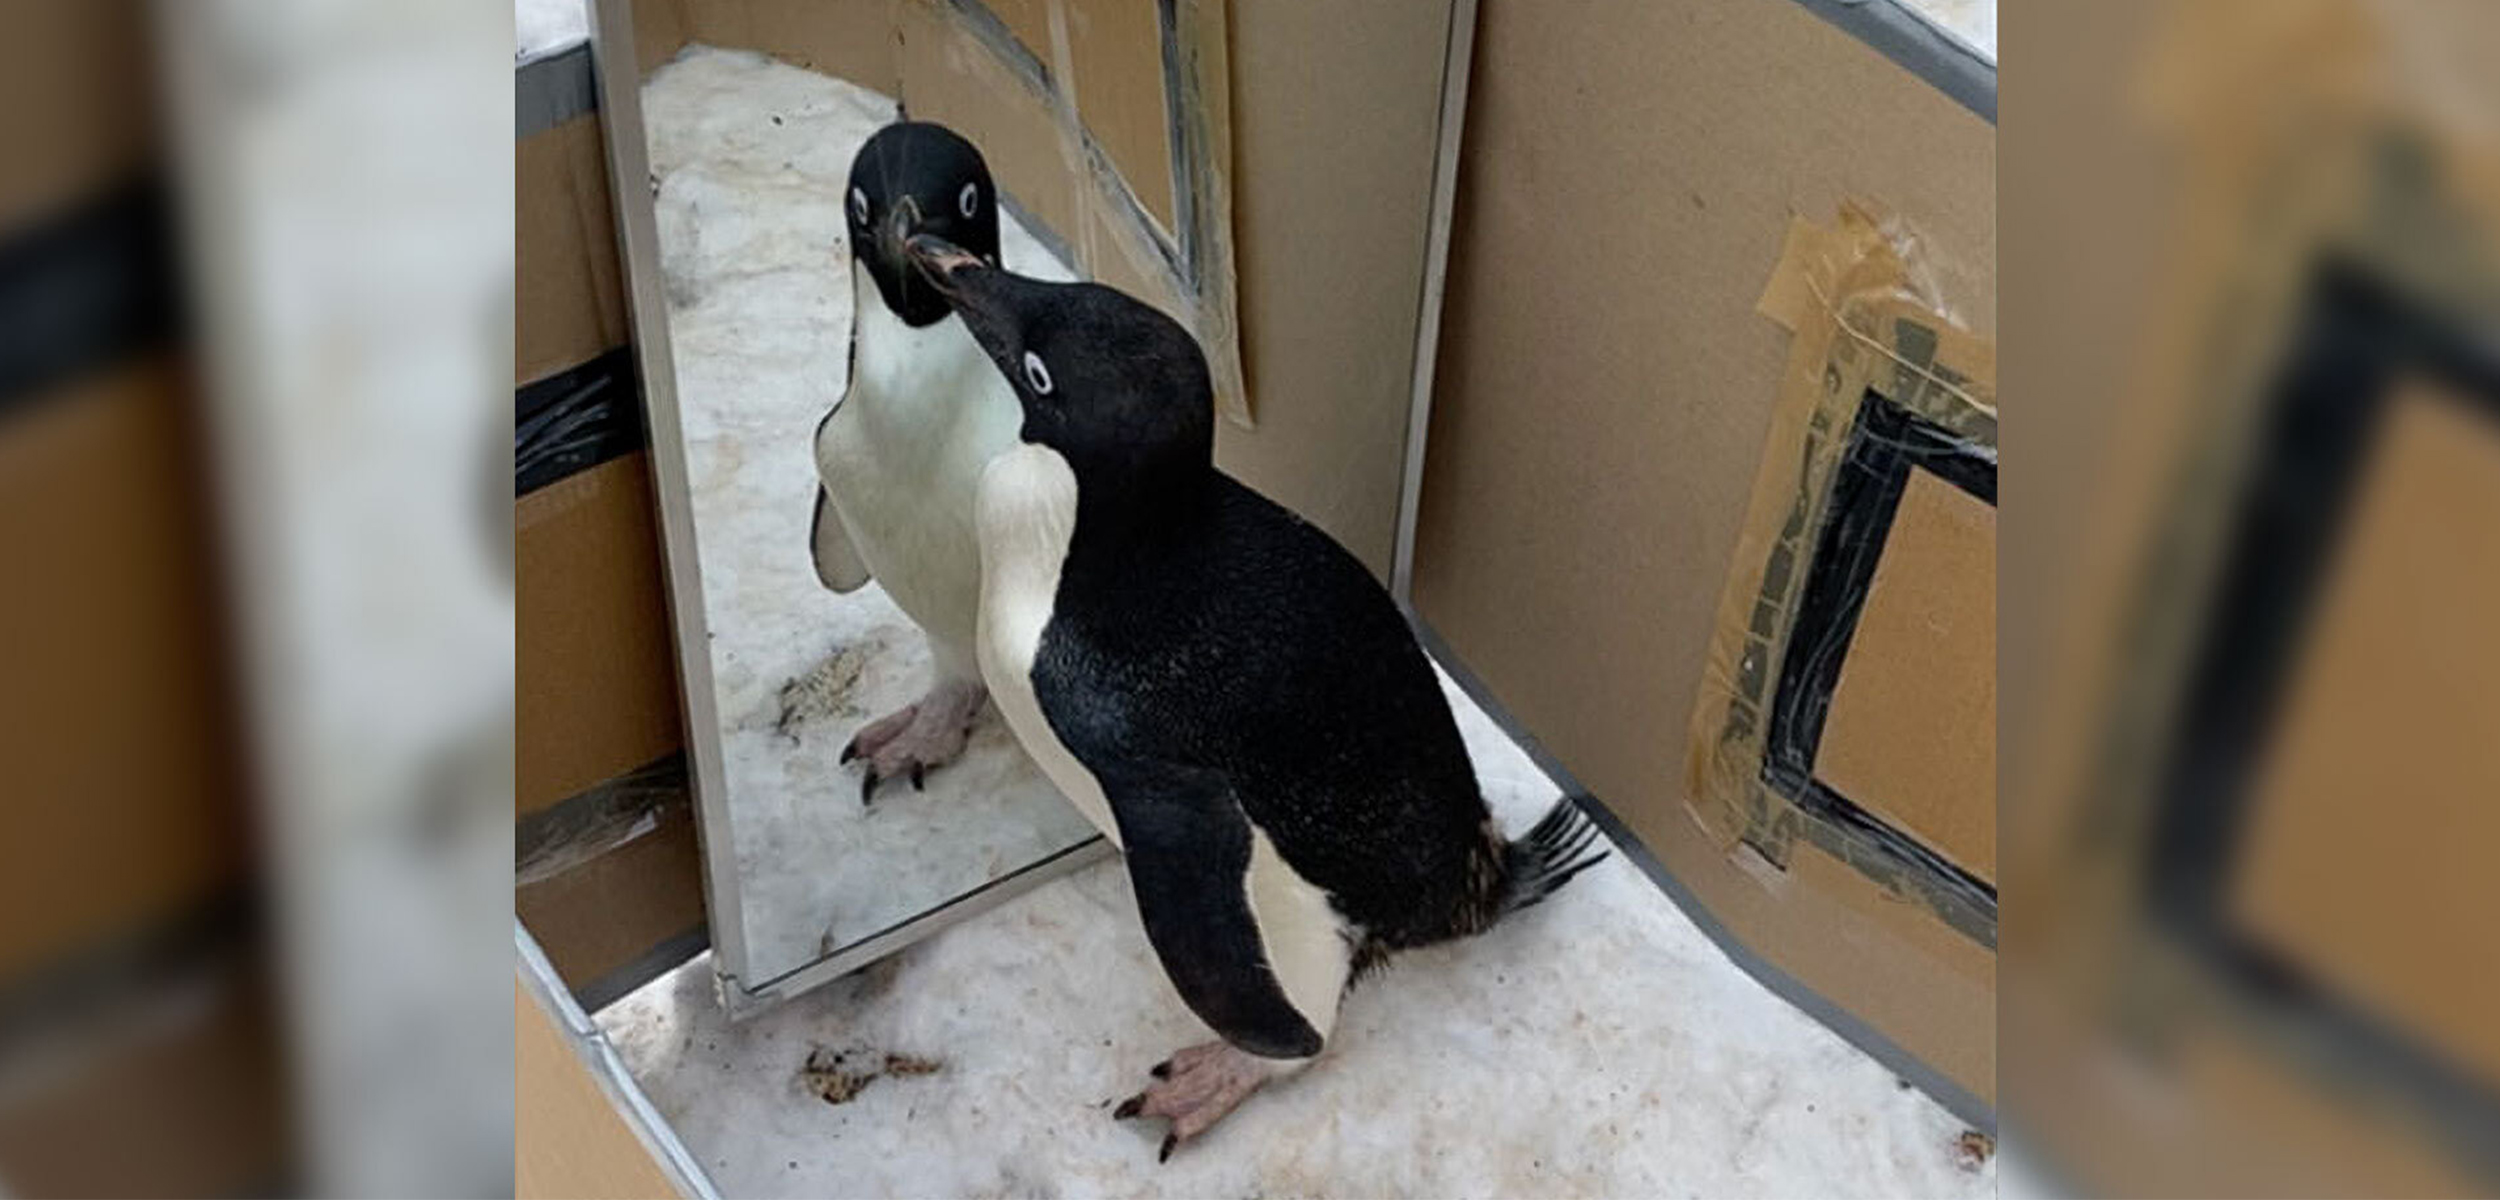 A small white and black penguin in a brown box looking at itself in a mirror.